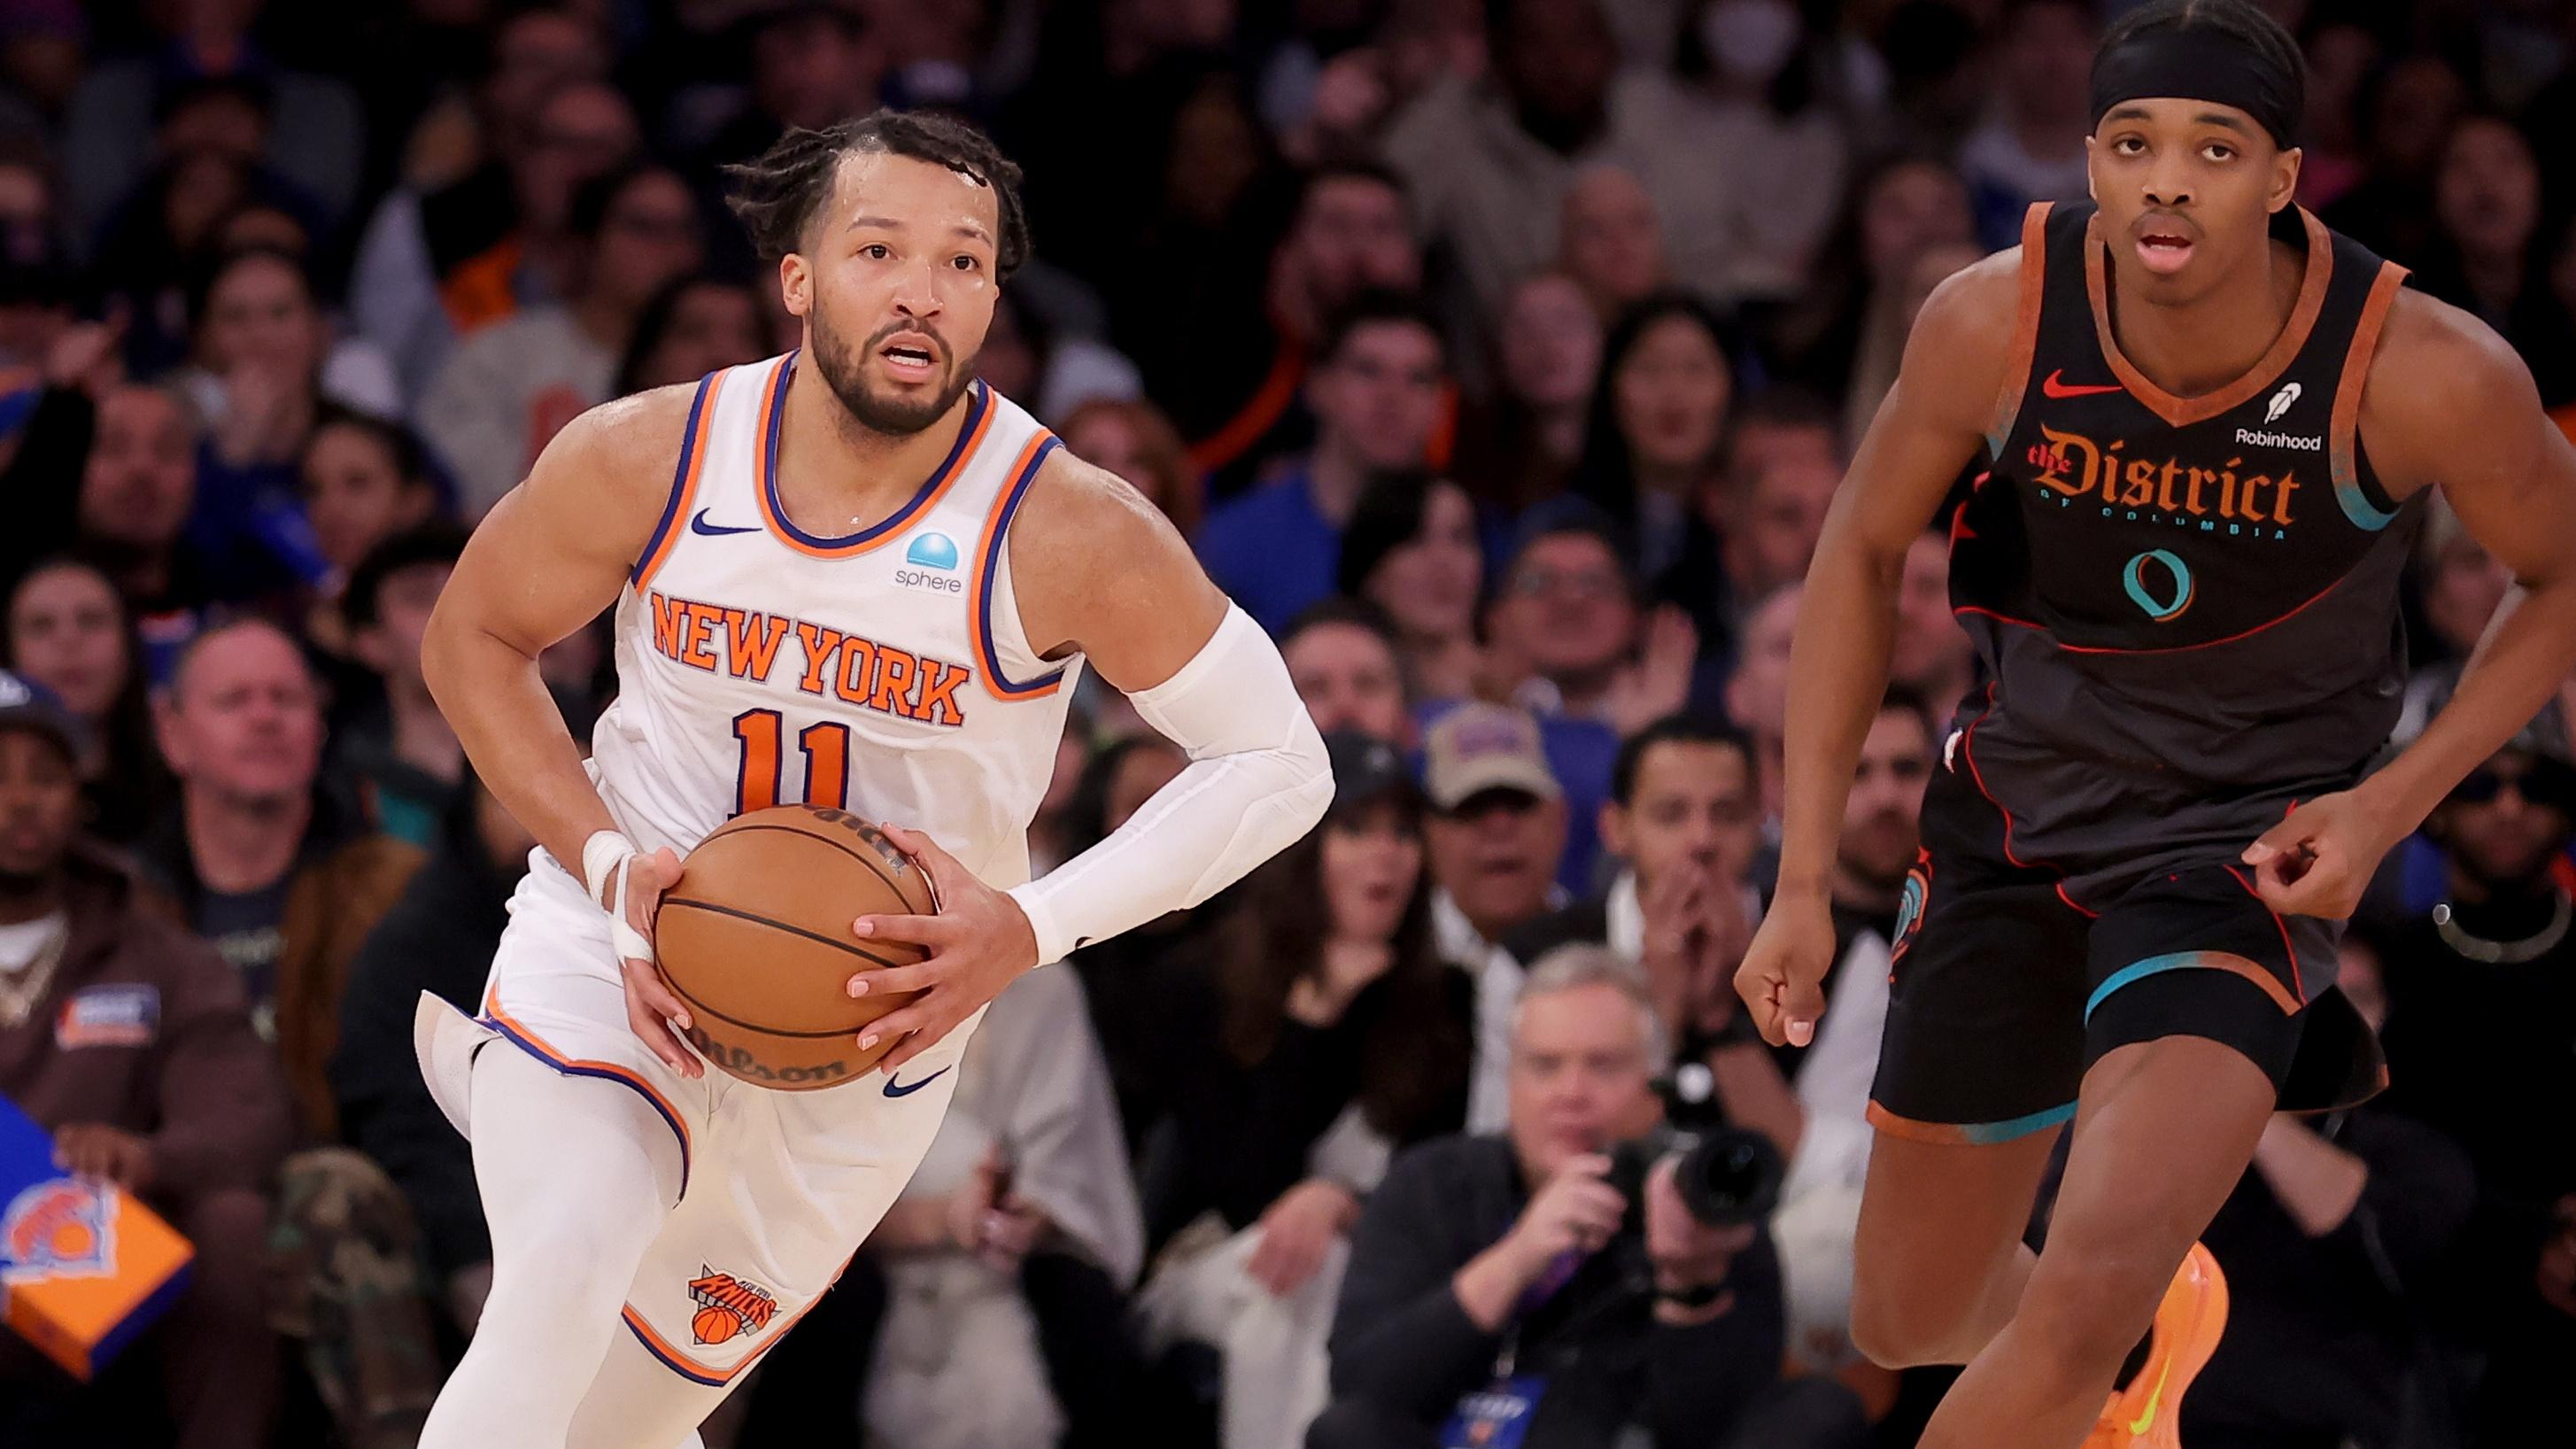 New York Knicks guard Jalen Brunson (11) looks to pass the ball against Washington Wizards guard Bilal Coulibaly (0) during the second quarter at Madison Square Garden / Brad Penner - USA TODAY Sports